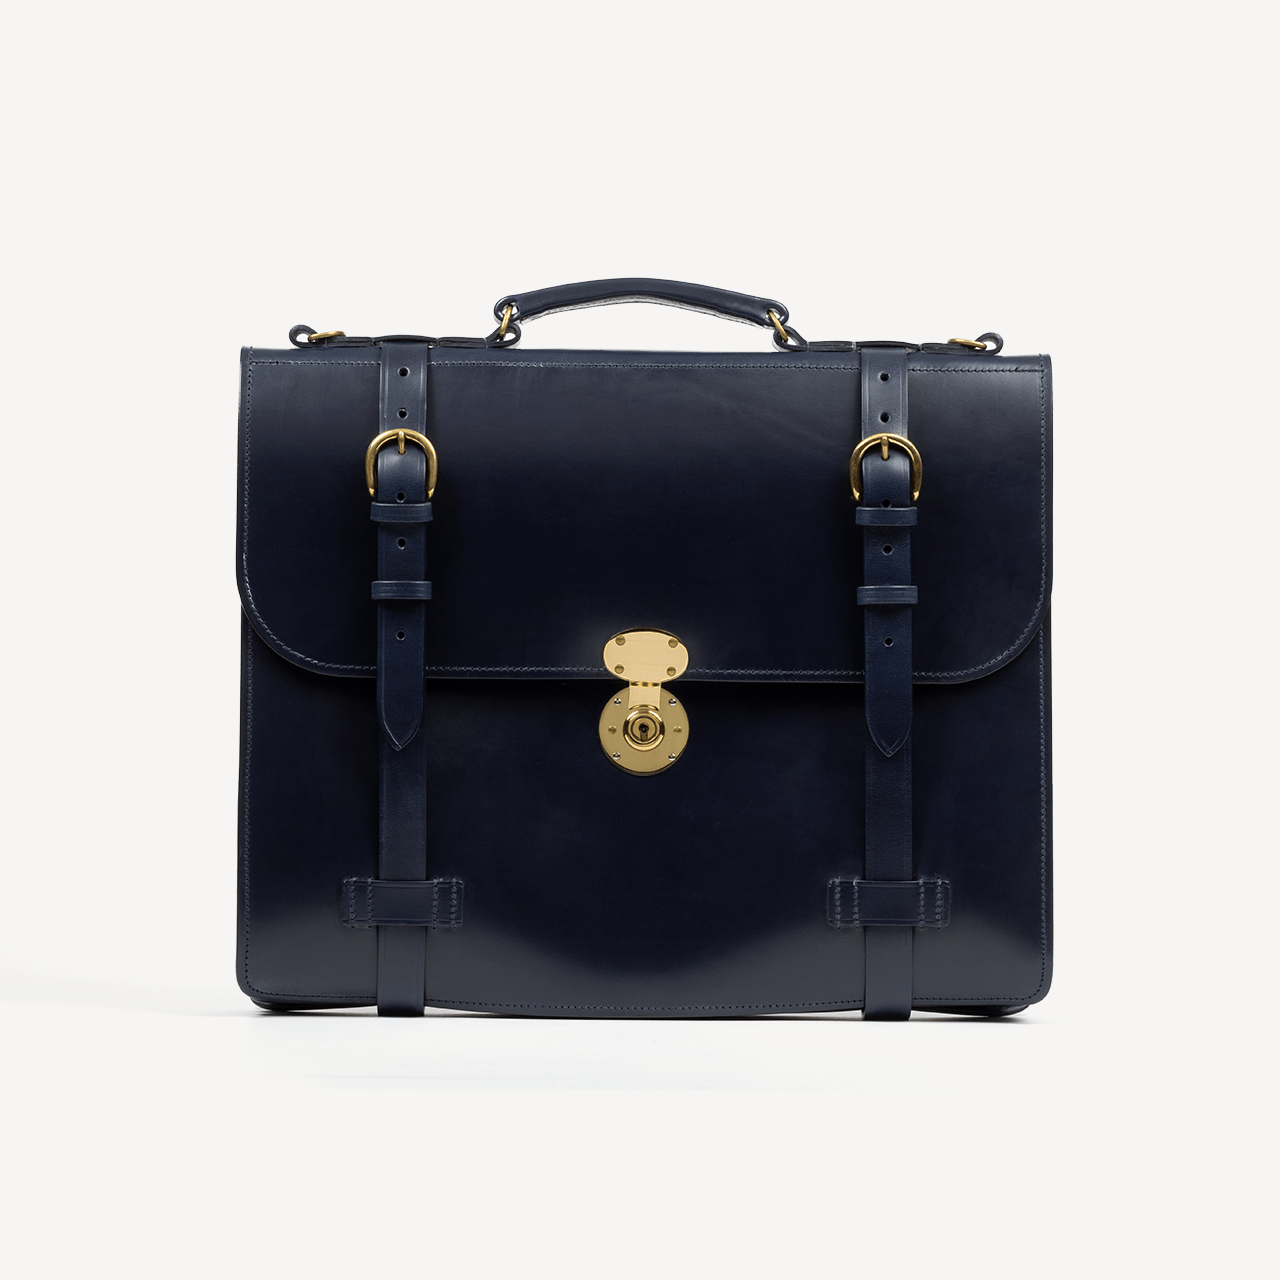 Westminster 3 - Navy - Swaine